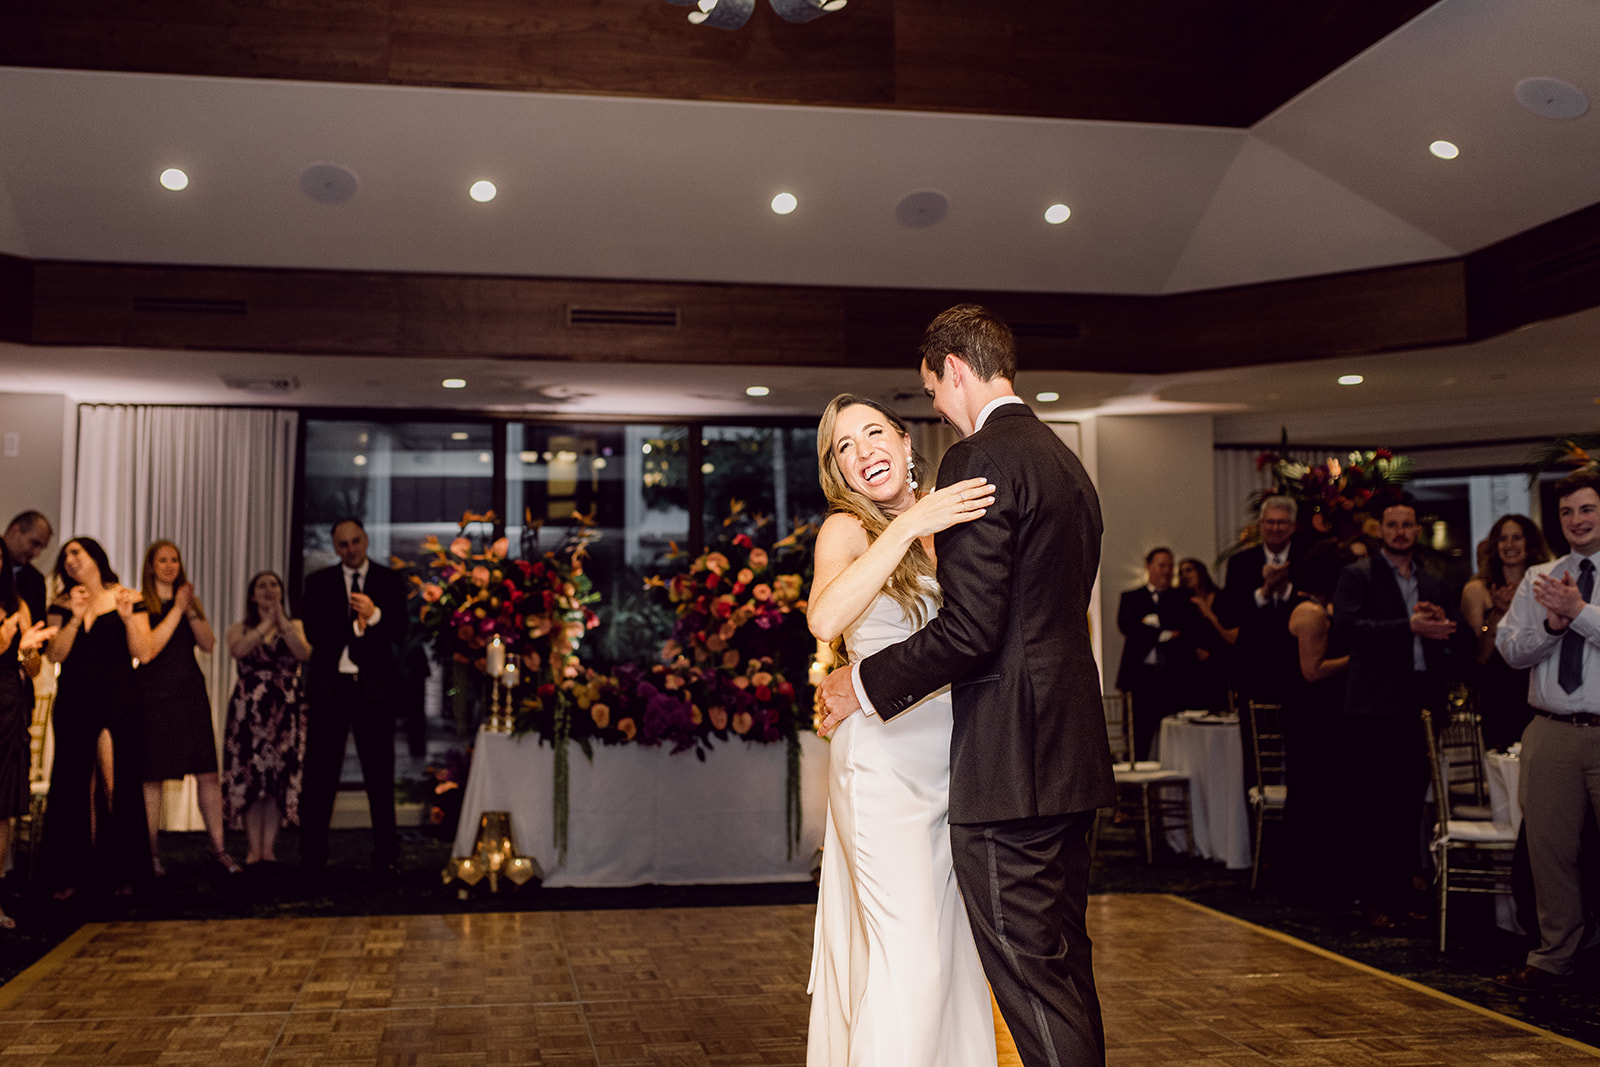 Laughing bride and groom first dance at reception at Mayfair House Hotel & Garden, Miami on wedding day.